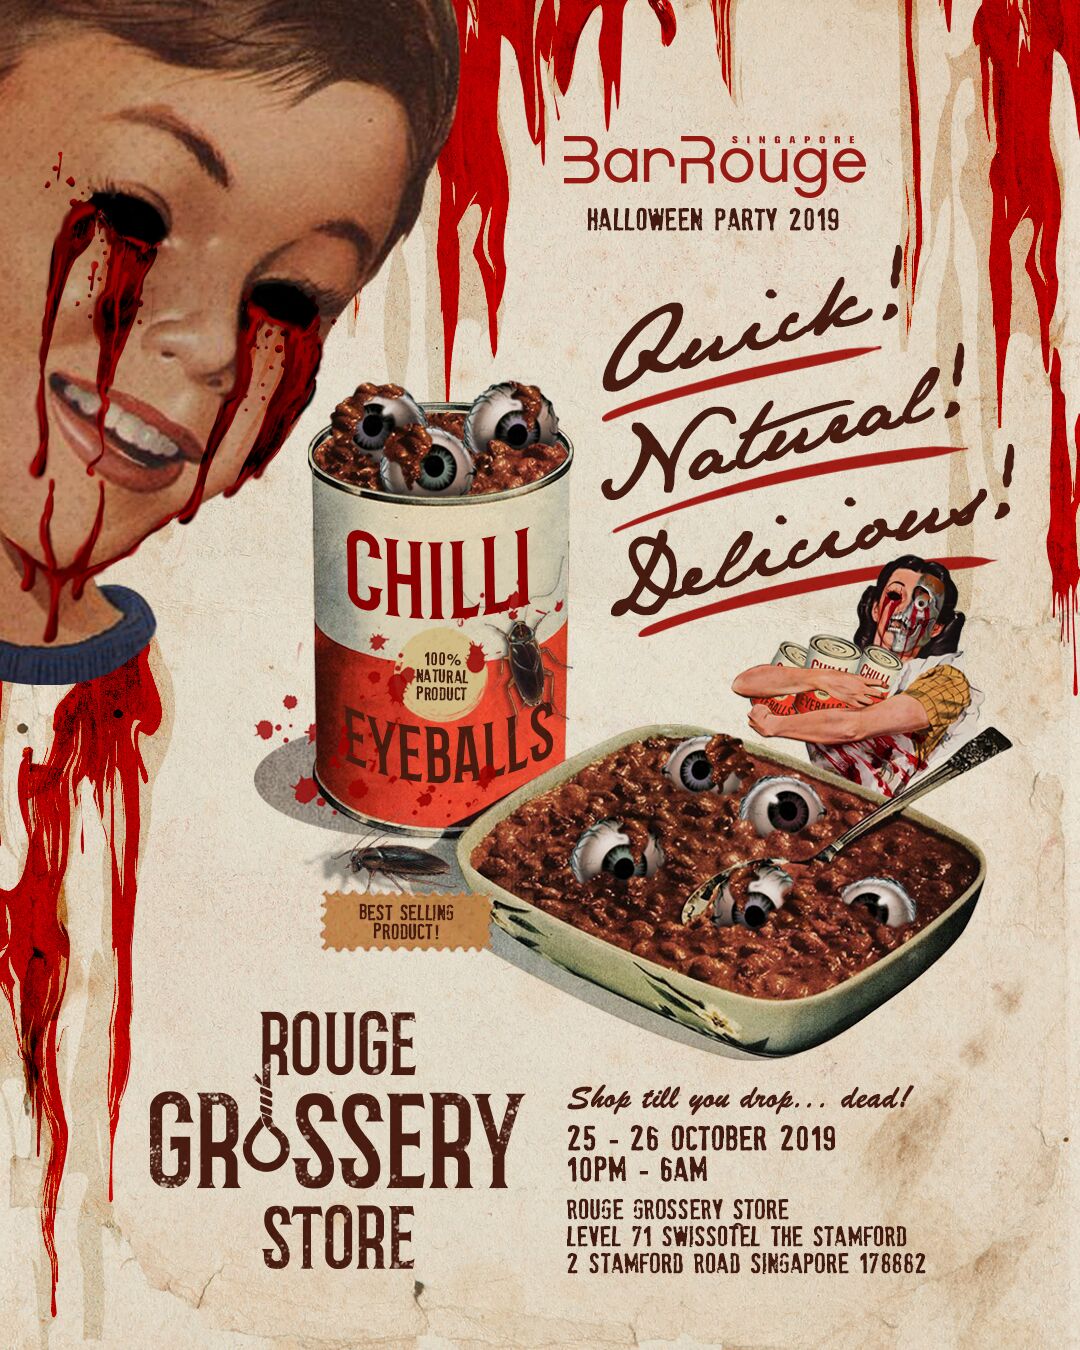 Rouge Grossery Store at Bar Rouge